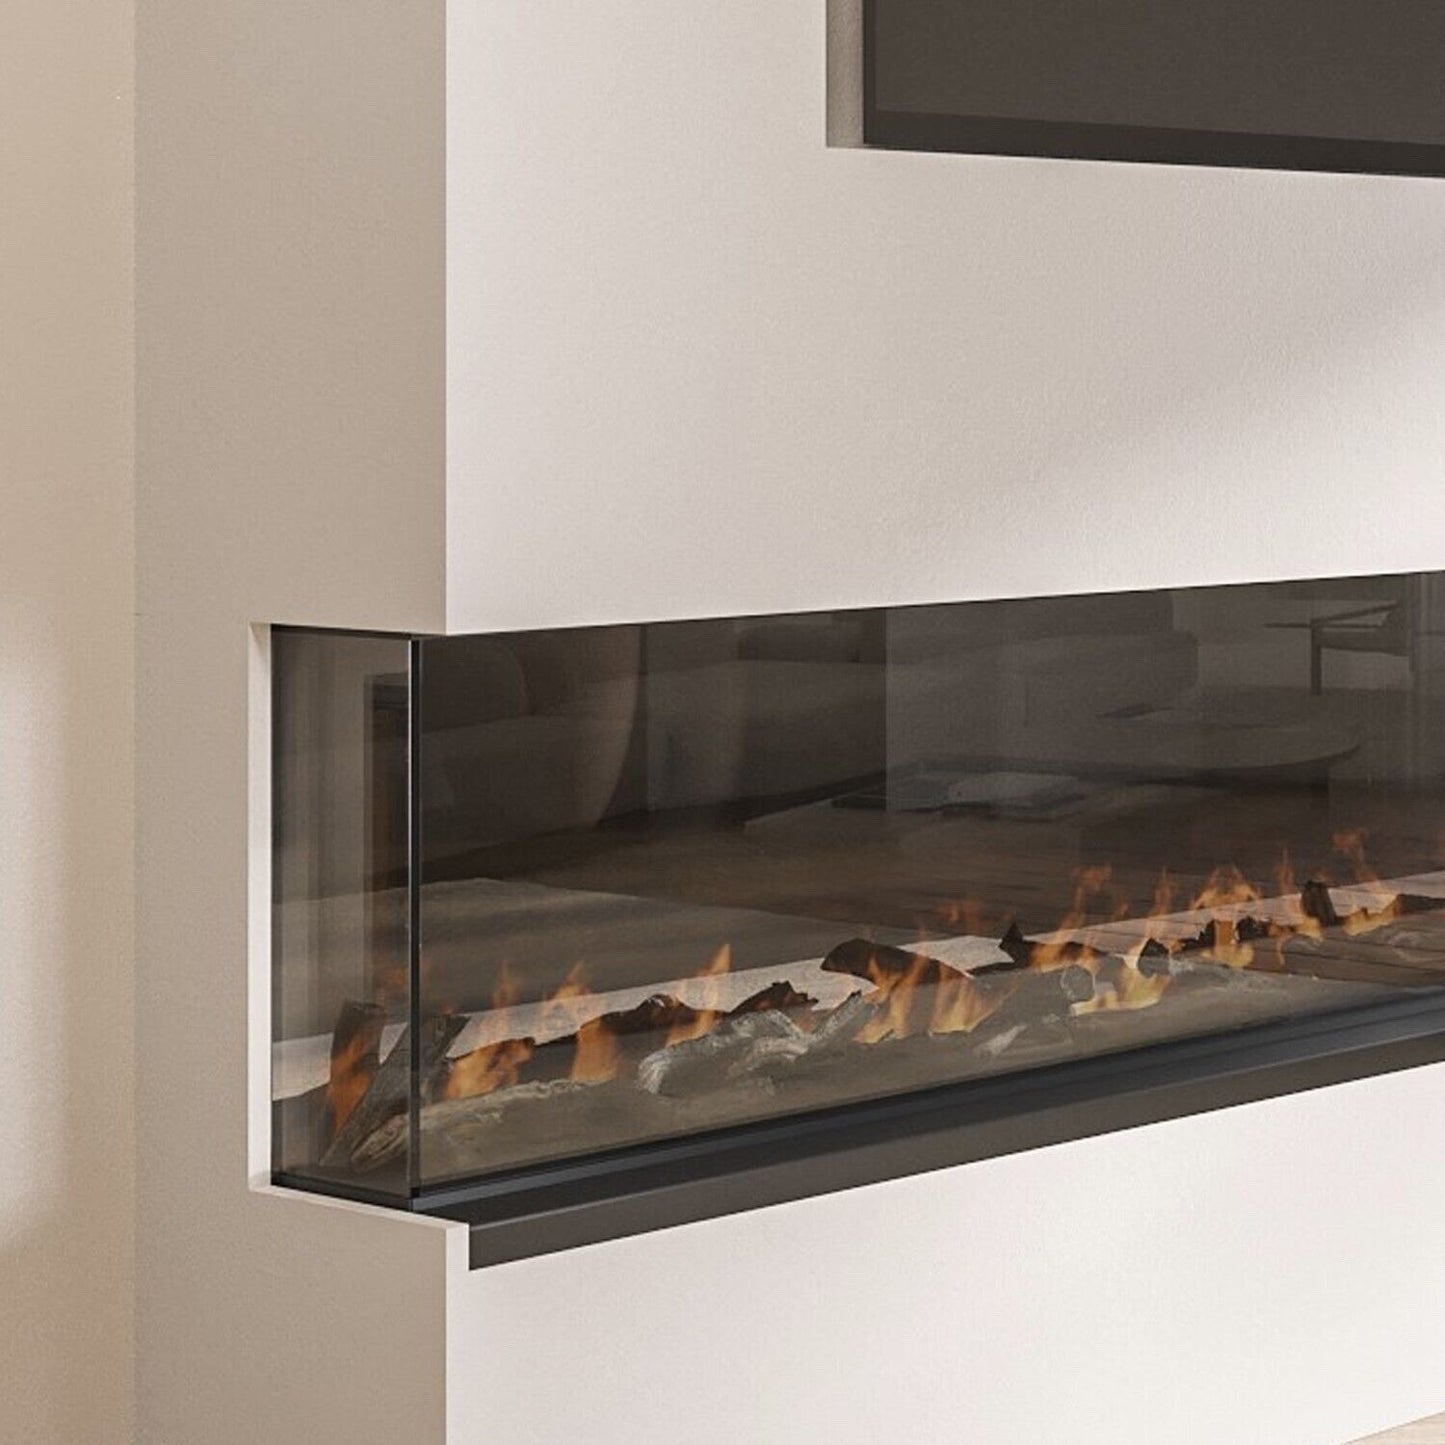 Electric Fire in Black Media Wall Inset with LED Flames